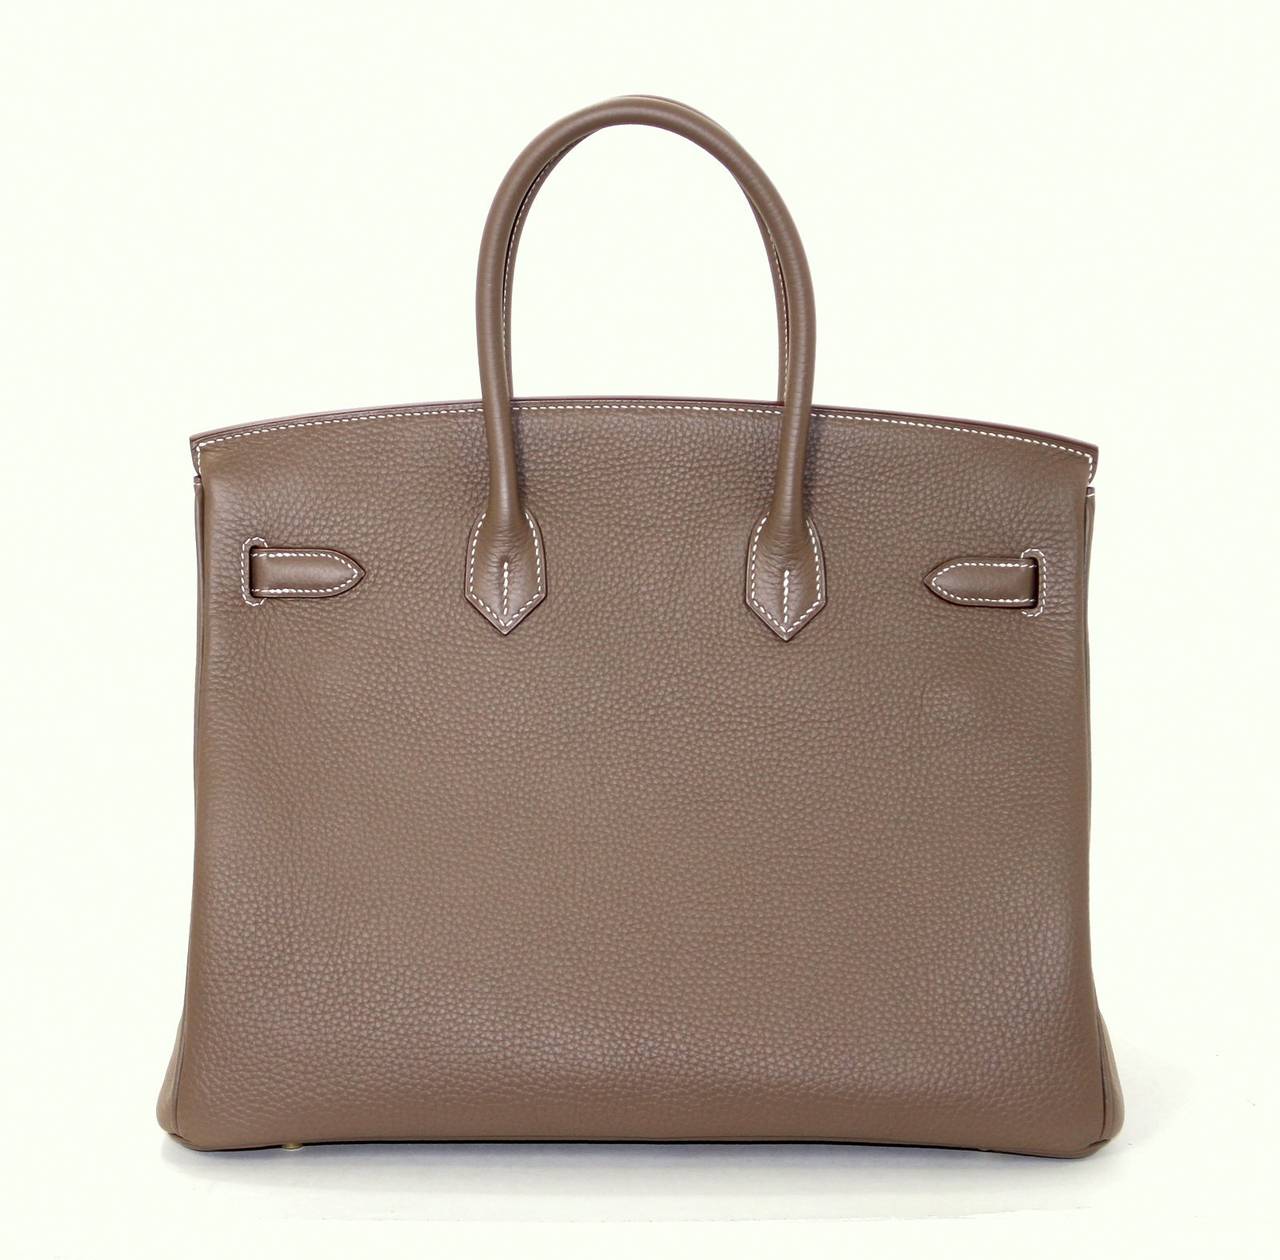 Pristine, store fresh condition (plastic on hardware) Hermès Birkin Bag in Etoupe (TAUPE) Clemence Leather with Gold Hardware, 35 cm size.   
Crafted by hand and considered by many as the epitome of luxury items, Birkins are extremely difficult to